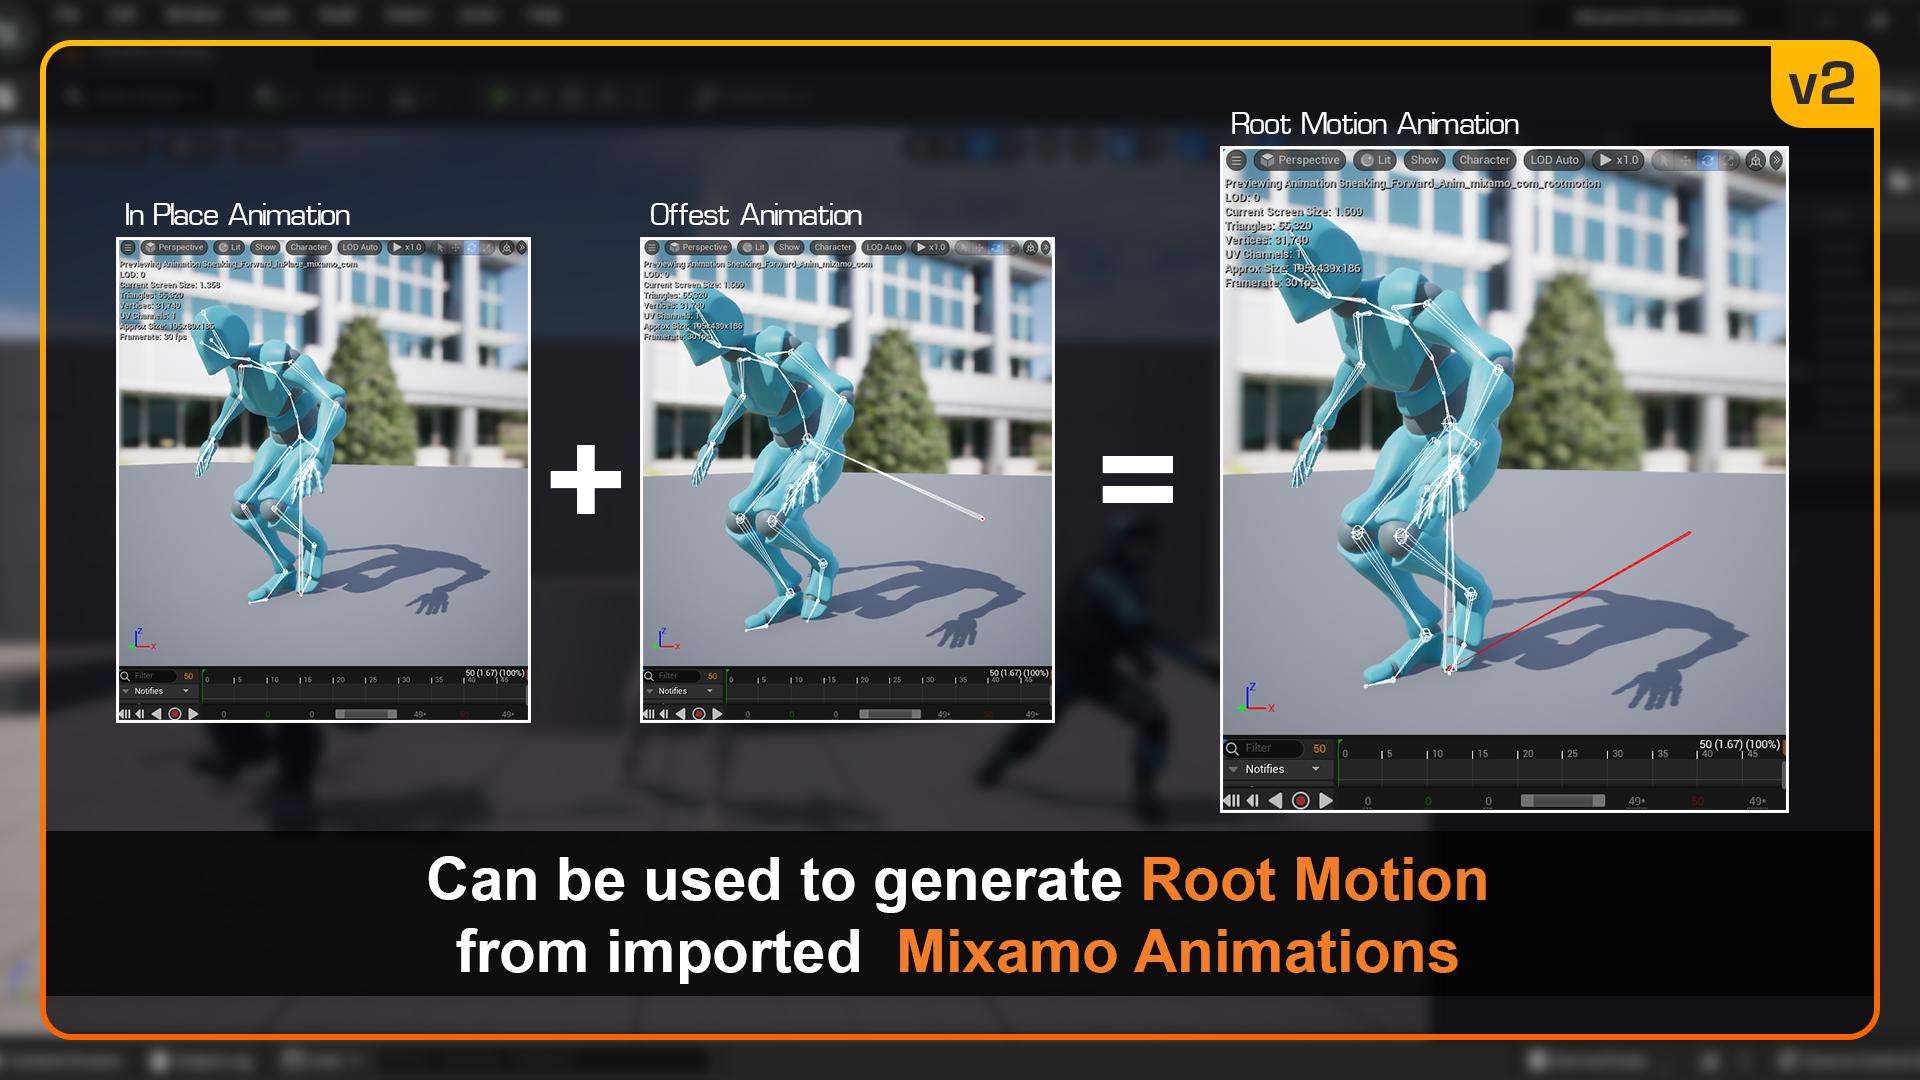 Can be used to generate Root Motion from imported Mixamo Animations